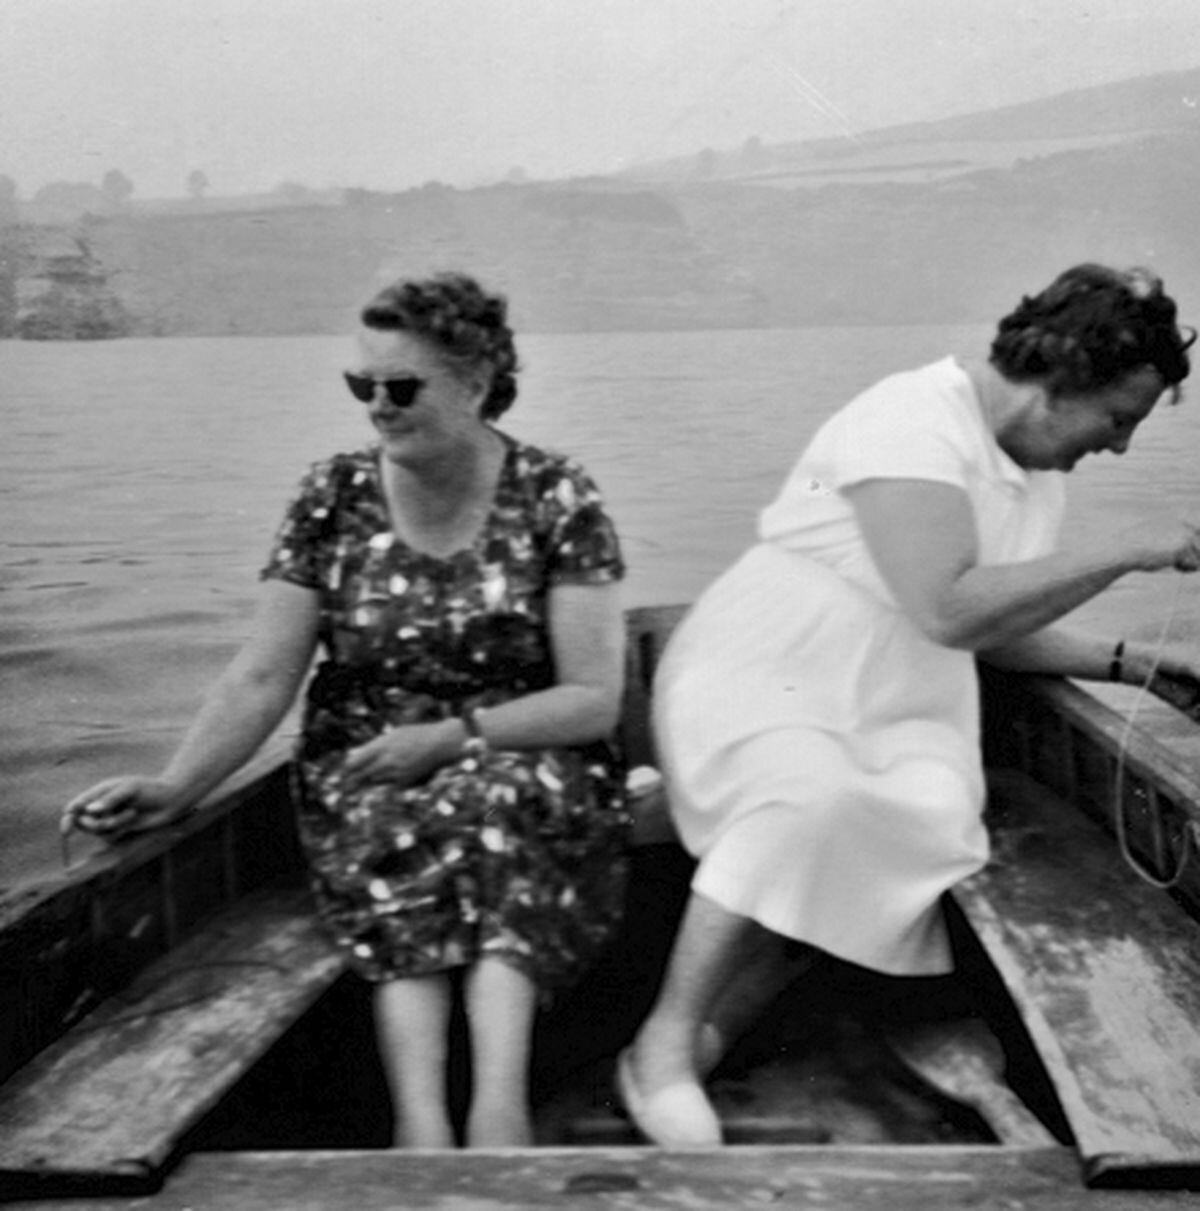 Derek's mum Jean and her sister Dorothy Campbell, known as "Peta," try their hand in Ladram Bay, Devon.